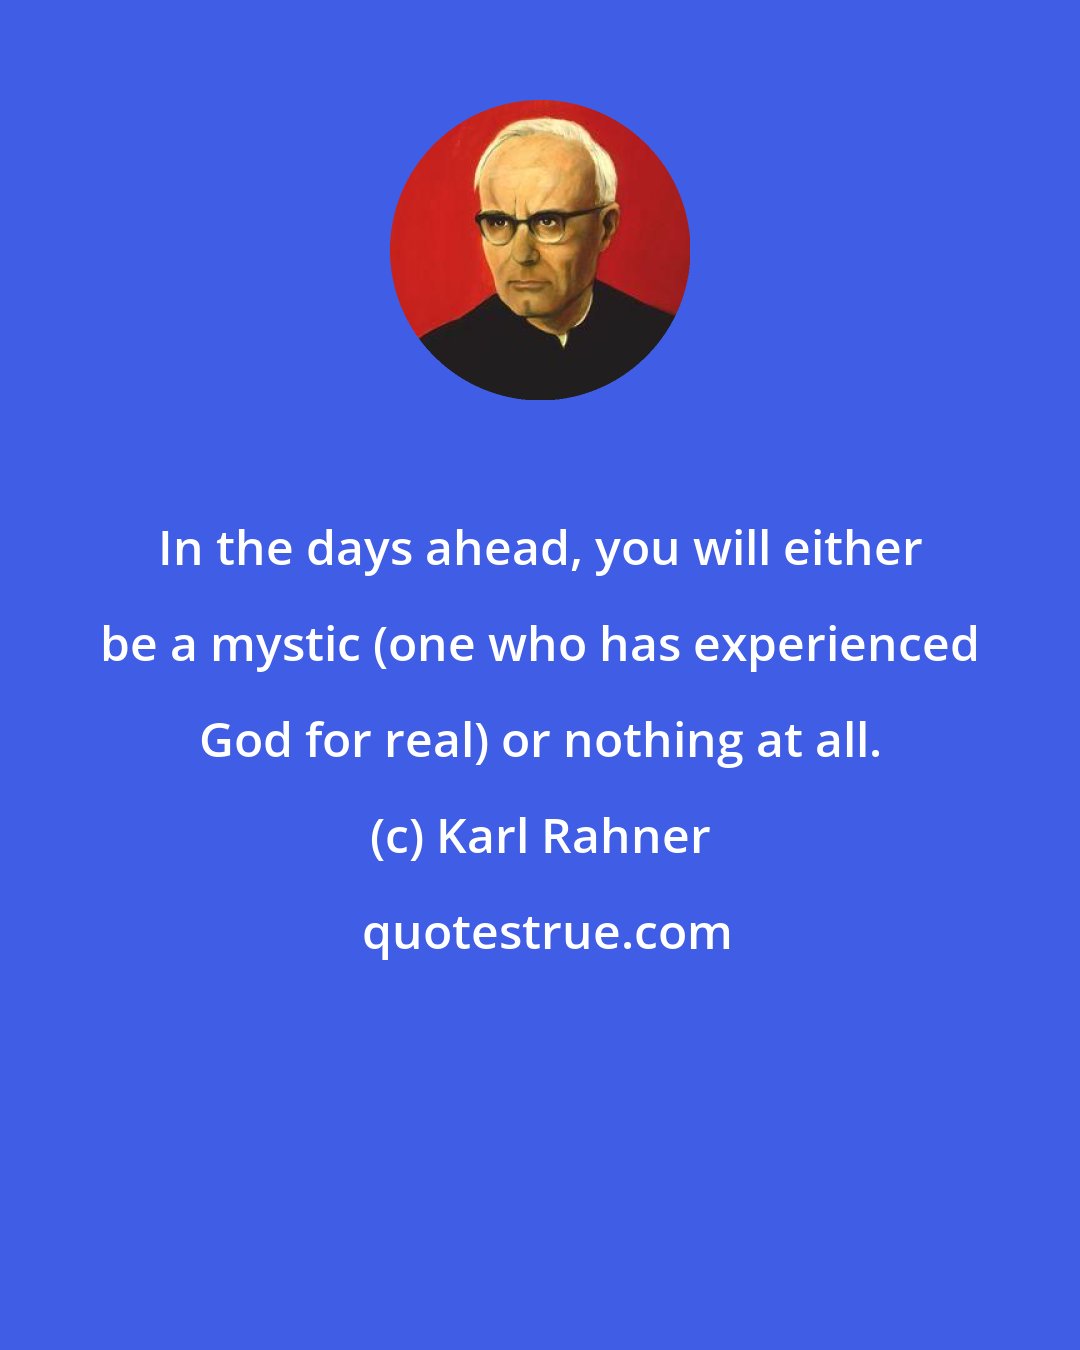 Karl Rahner: In the days ahead, you will either be a mystic (one who has experienced God for real) or nothing at all.